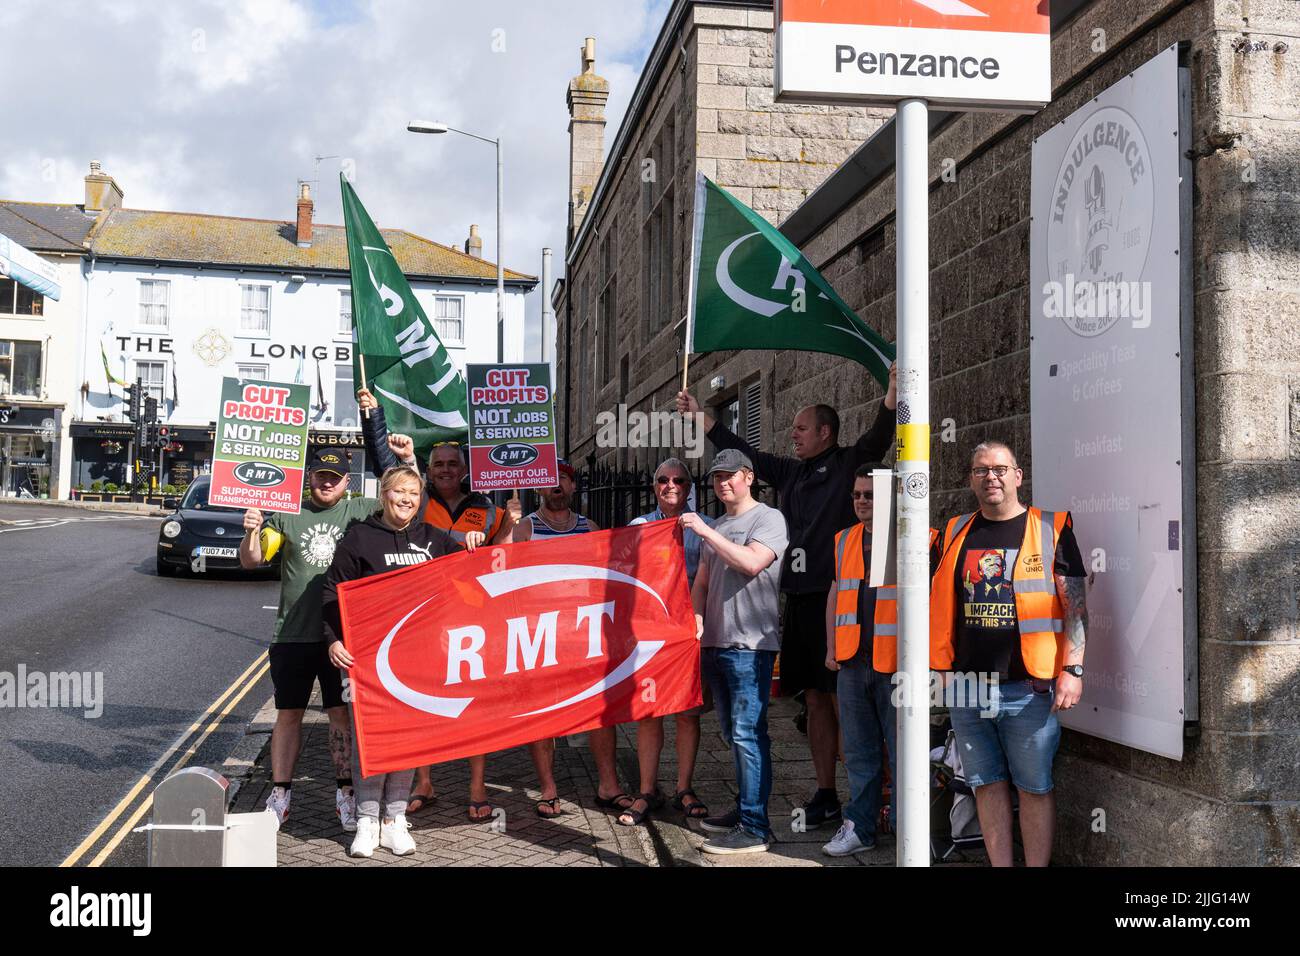 Striking RMT workers on a picket line at Penzance Railway station in Cornwall in the UK. Stock Photo